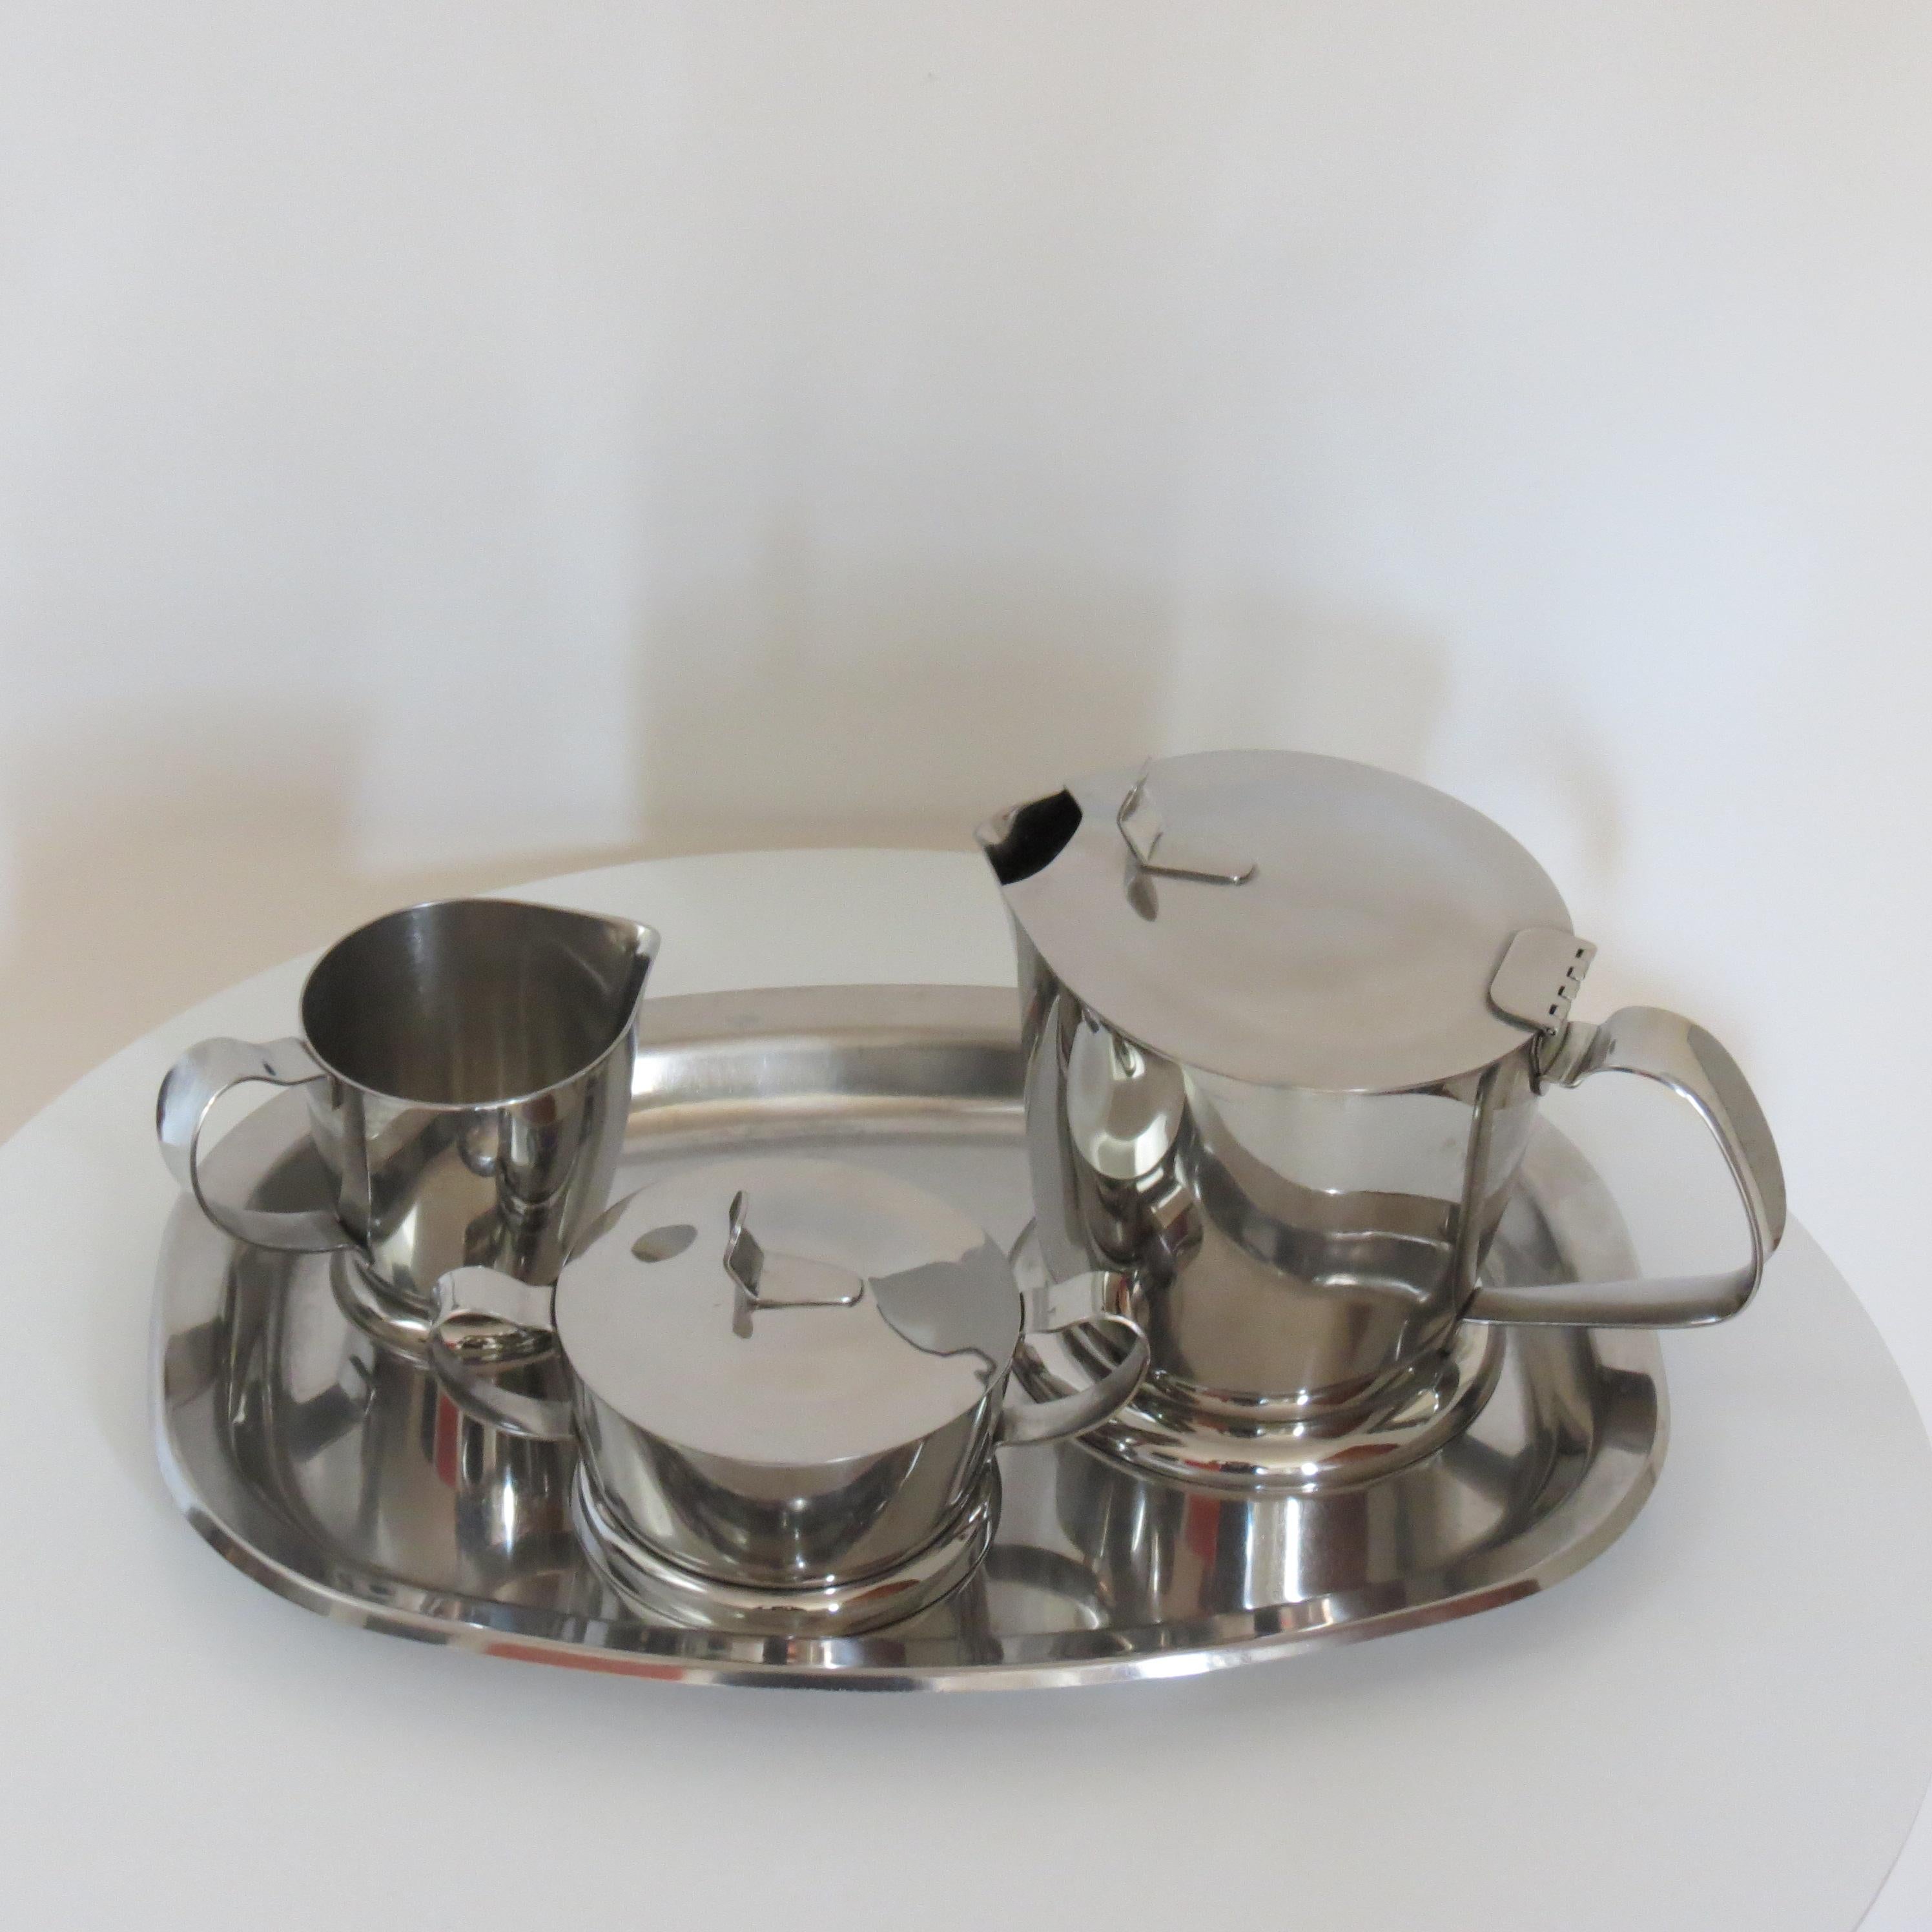 .Very good quality tea set comprising tea pot, lidded sugar bowl, milk jug and tray by Gense of Sweden.

Made from stainless steel.  In good over all condition.  Dates from the 1960s.

Tray measures 31cm long 22.5cm wide 2cm tall.

Teapot